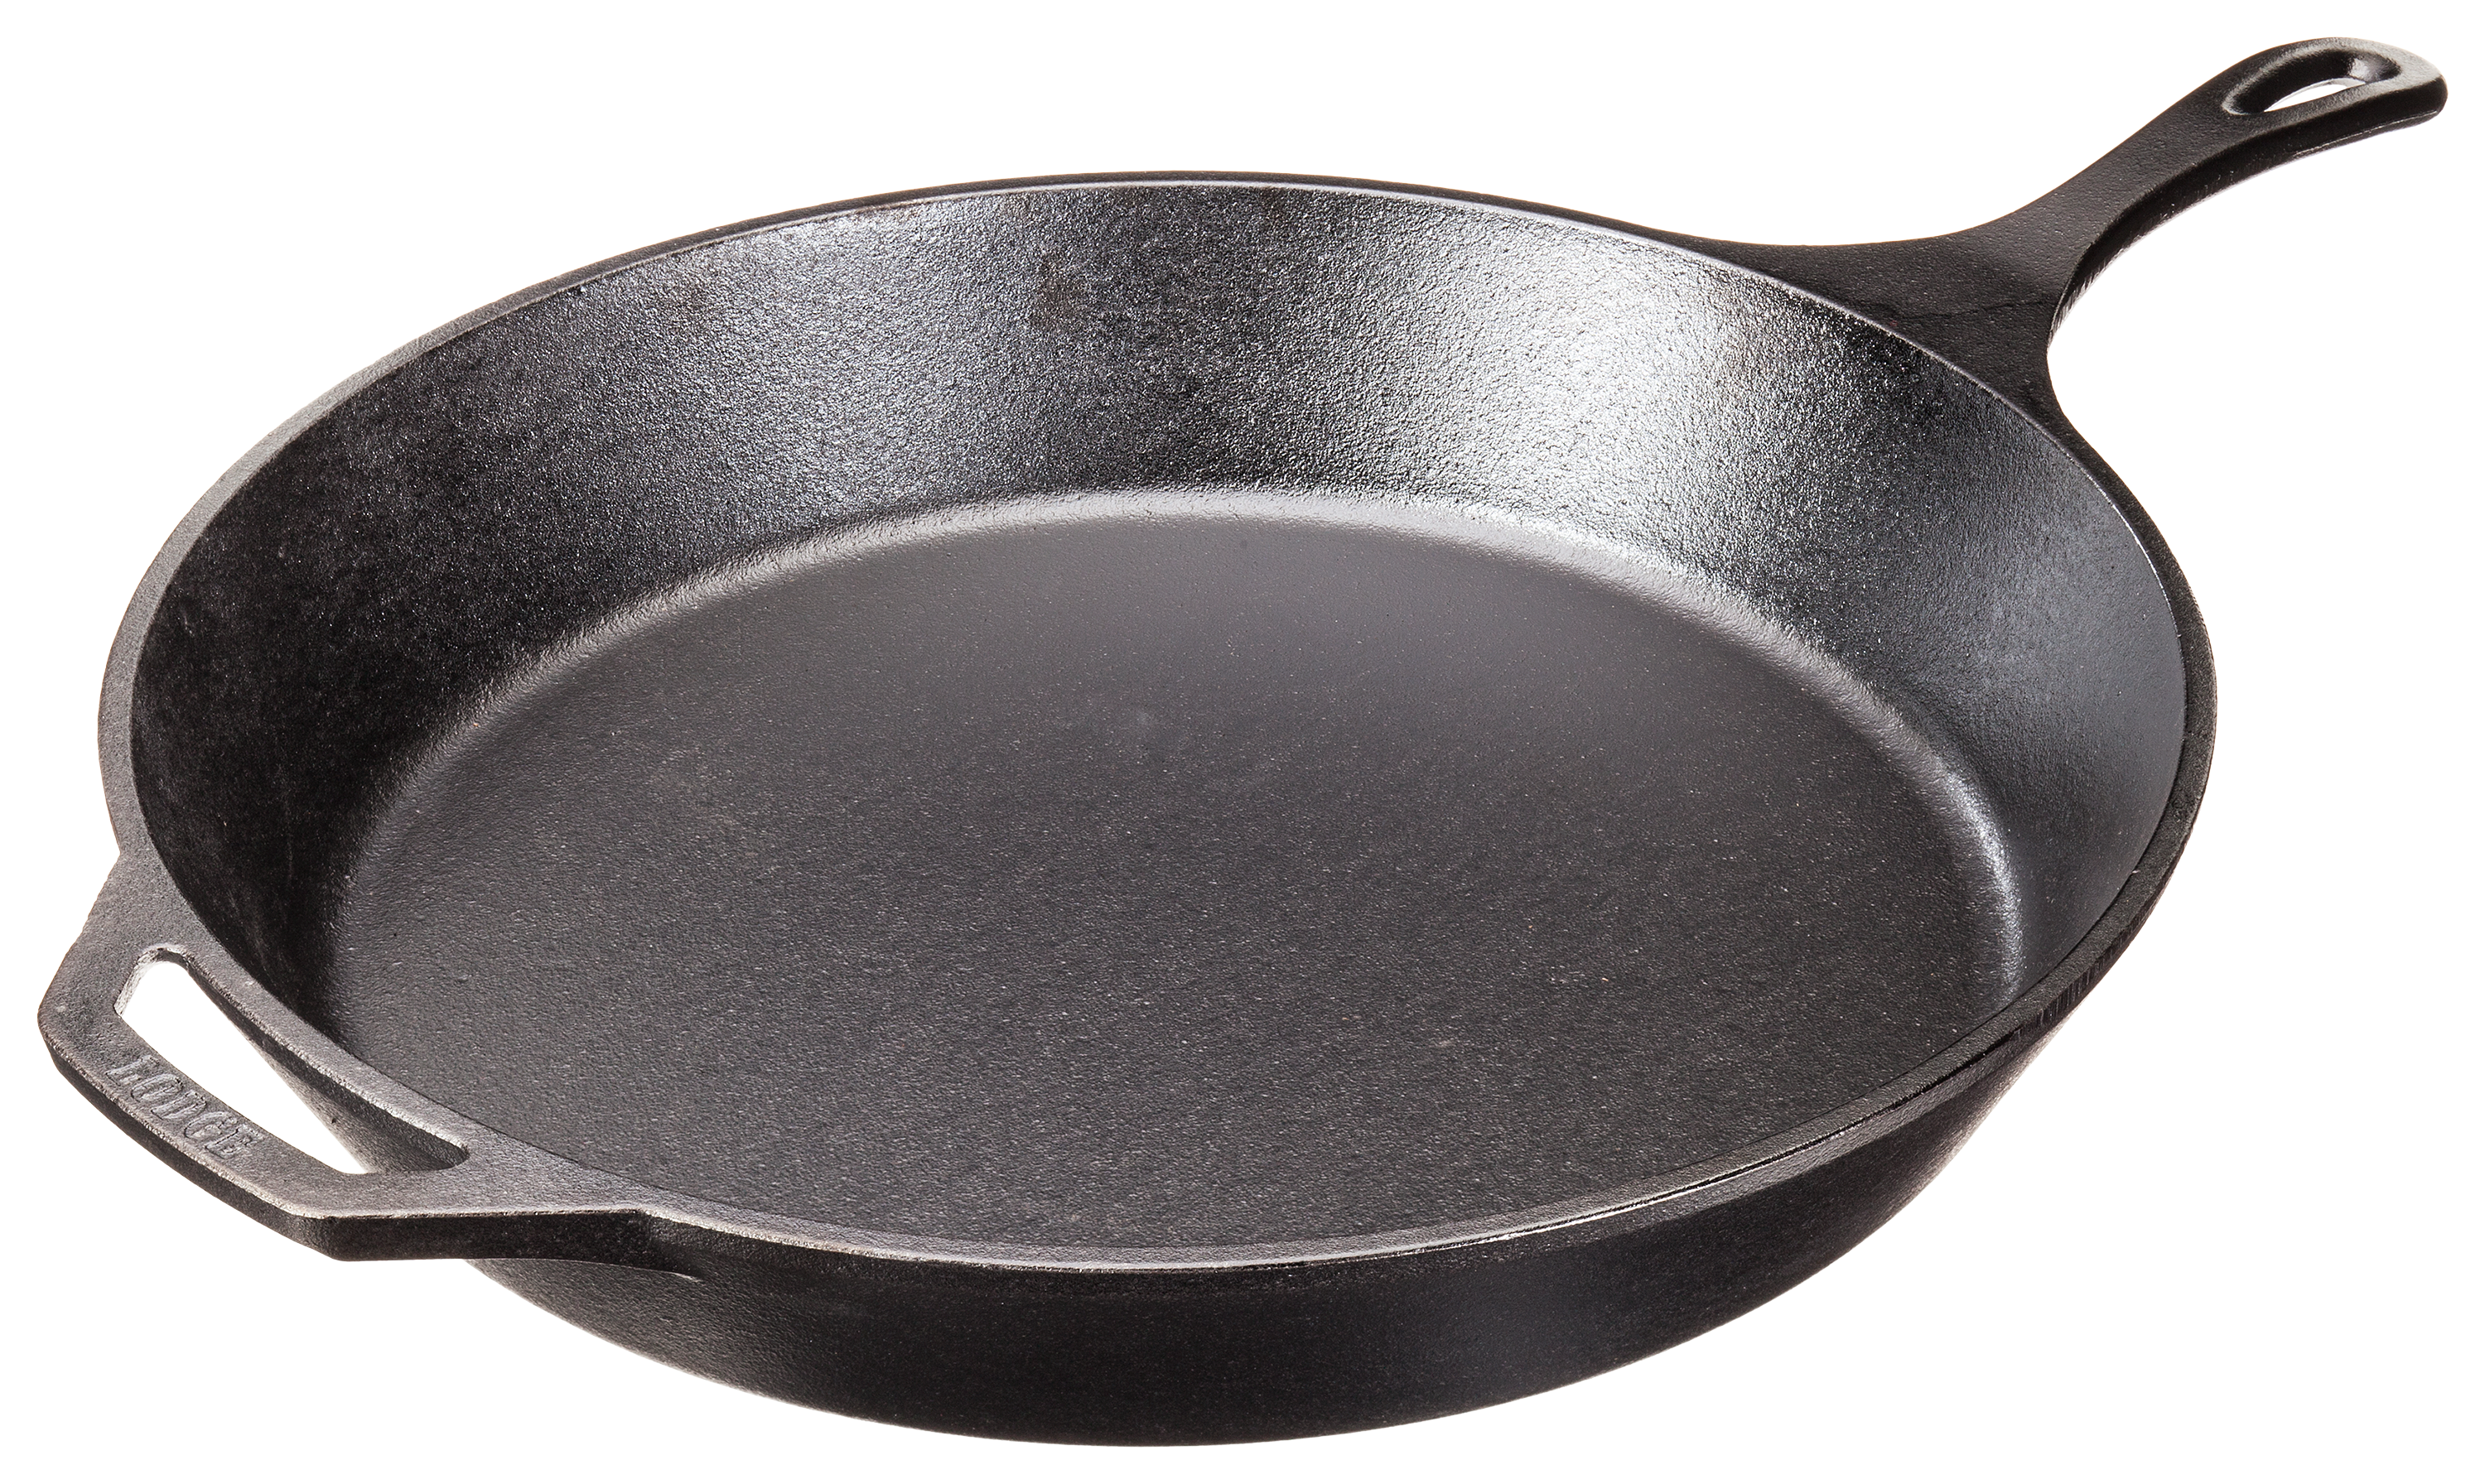 Lodge 12 In. Cast Iron Skillet with Assist Handle - Bay Hardware